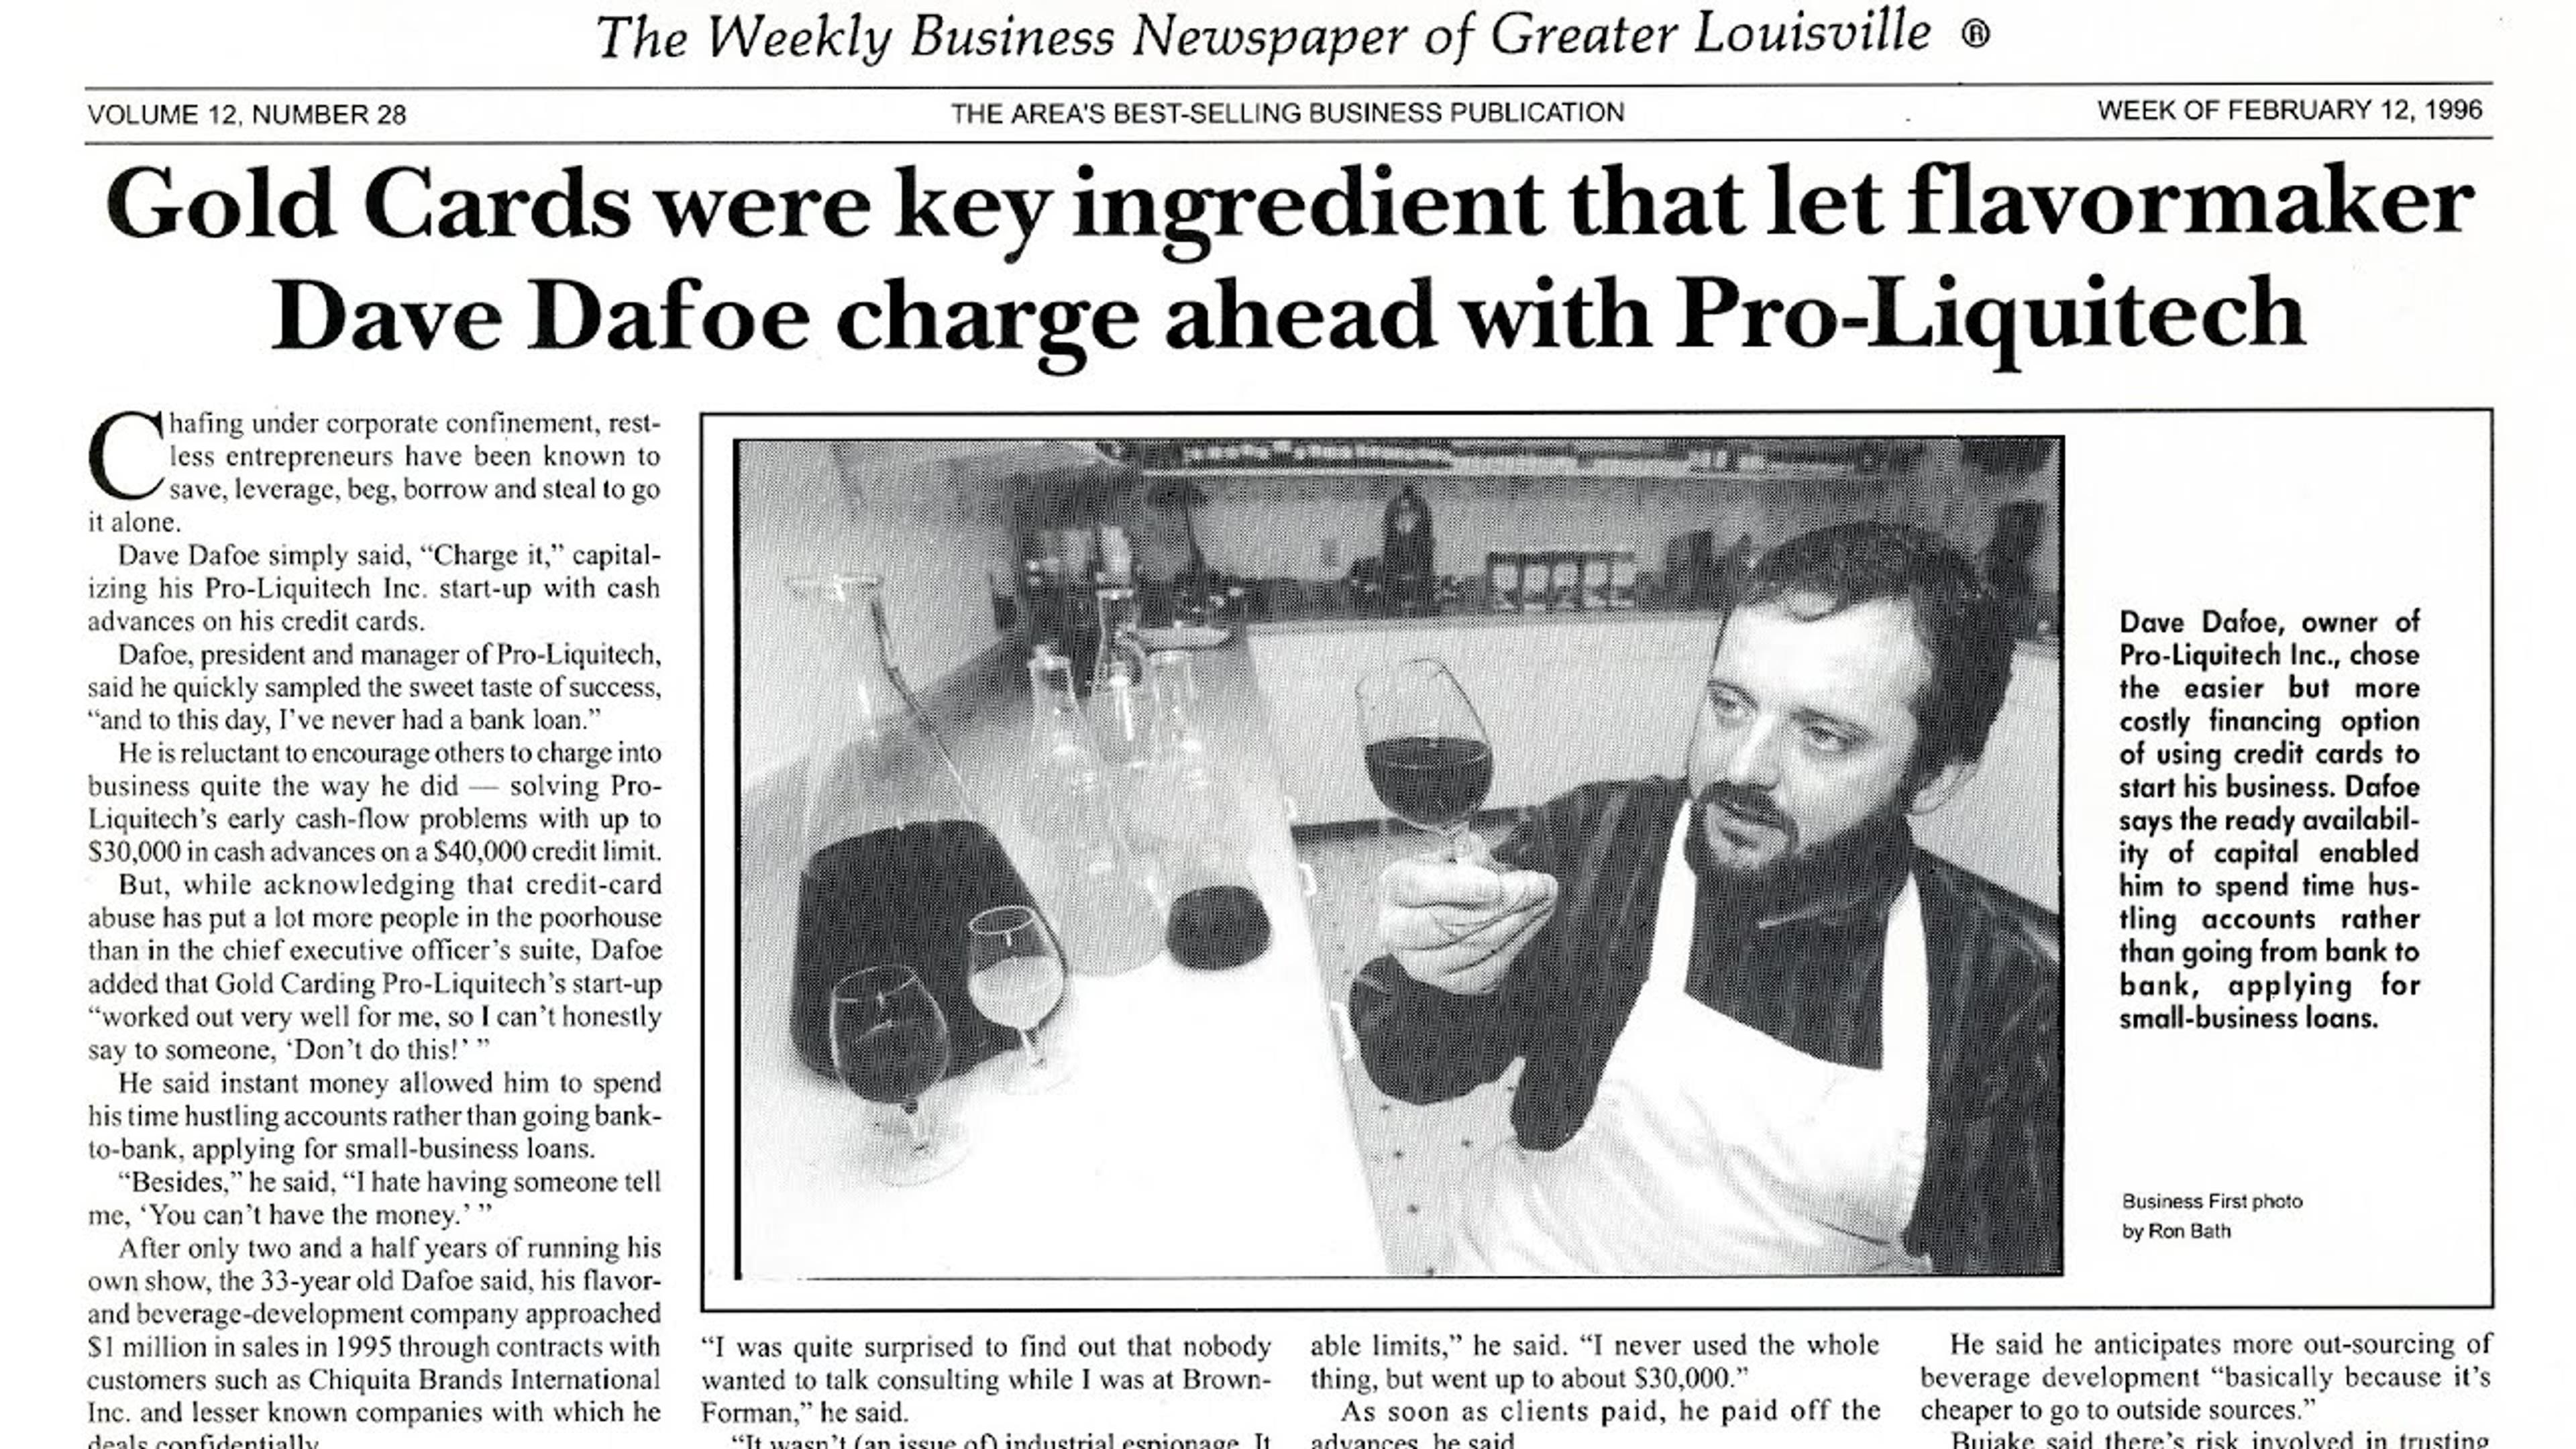 Newspaper Article: Gold cards were key ingredient that let flavormaker Dave Dafoe charge ahead with Pro-Liquitech.